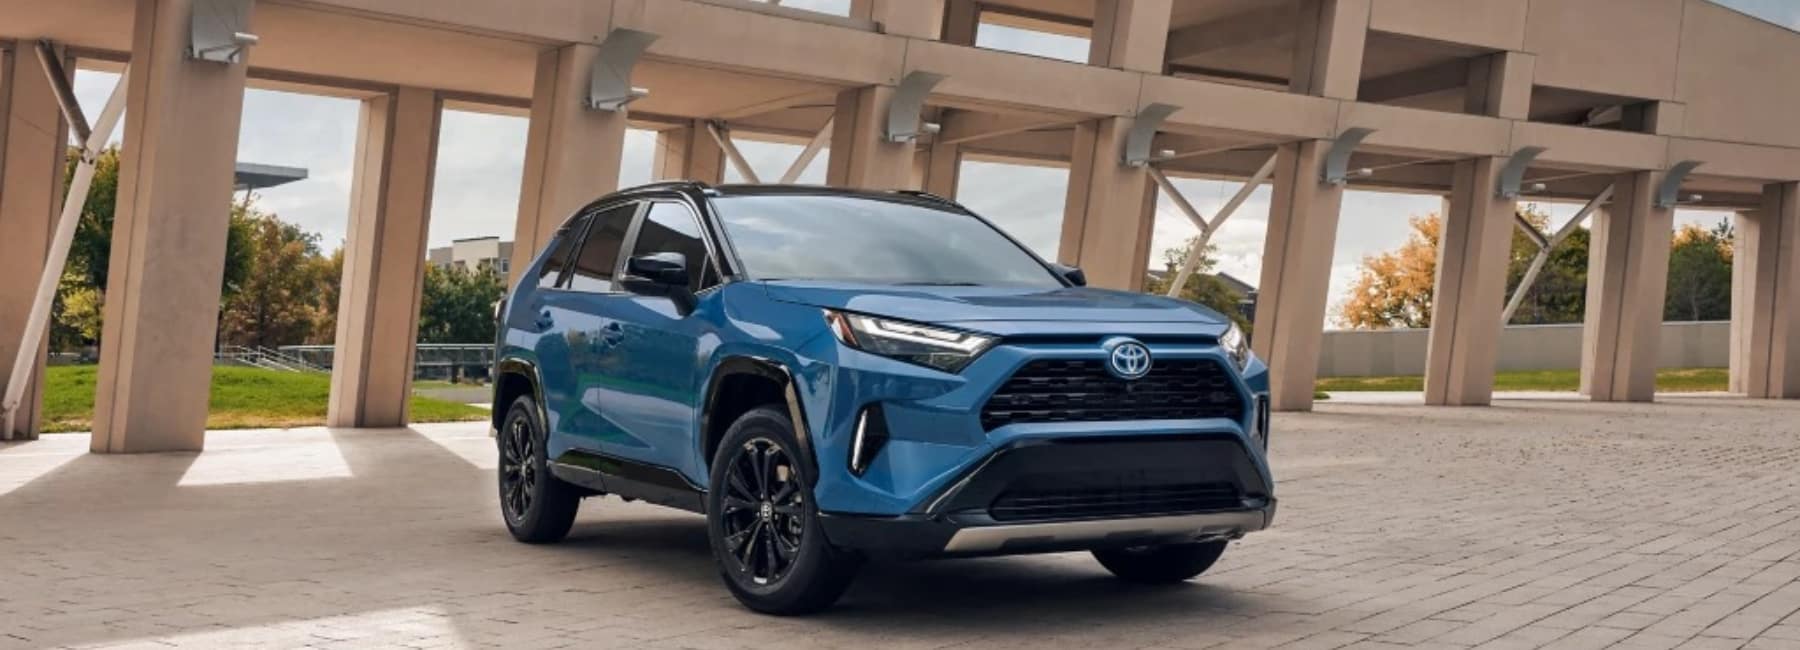 2022 Toyota RAV4 Hybrid front view parked in front of an aqueduct structure